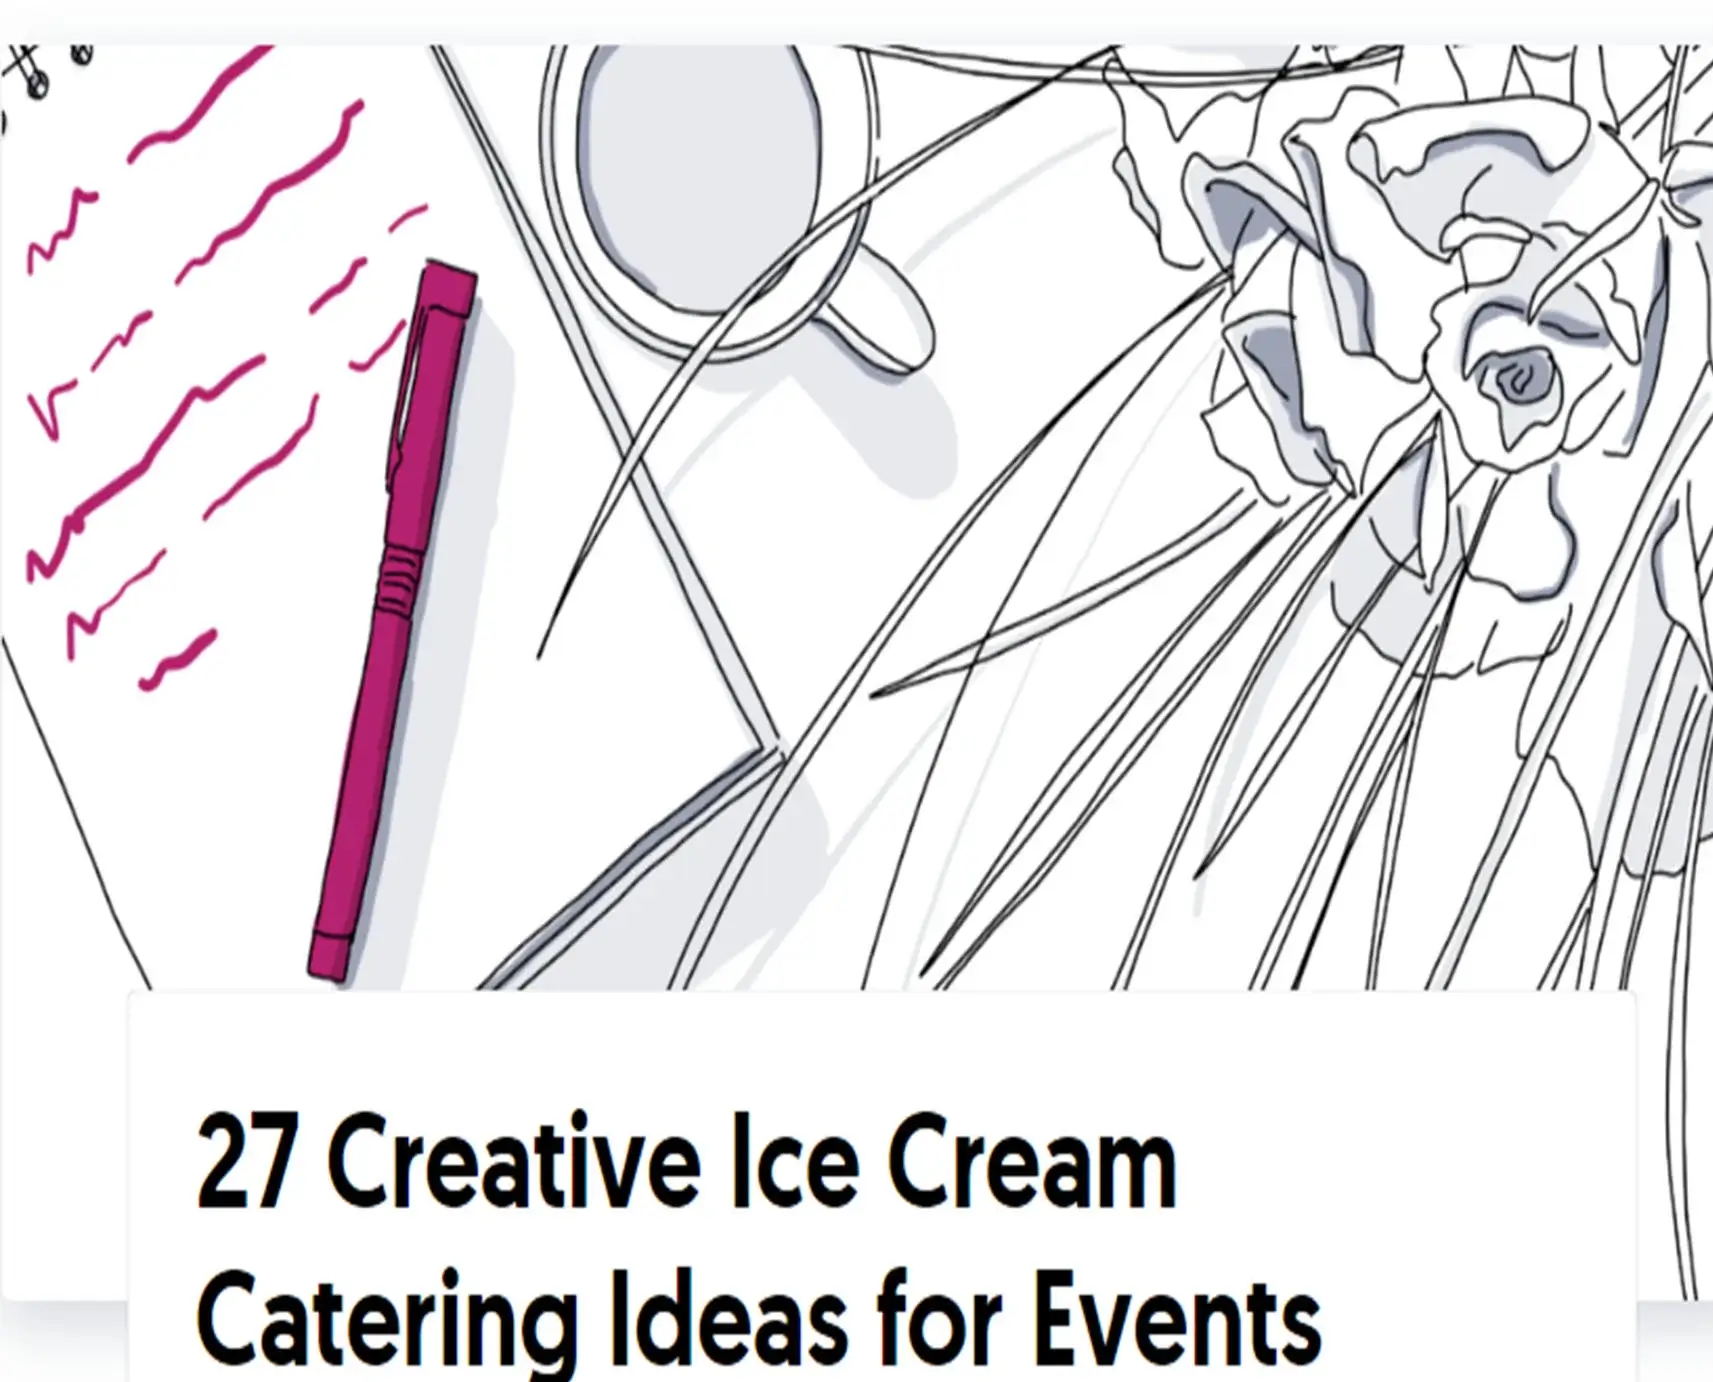 27 Creative Ice Cream Catering Ideas for Events